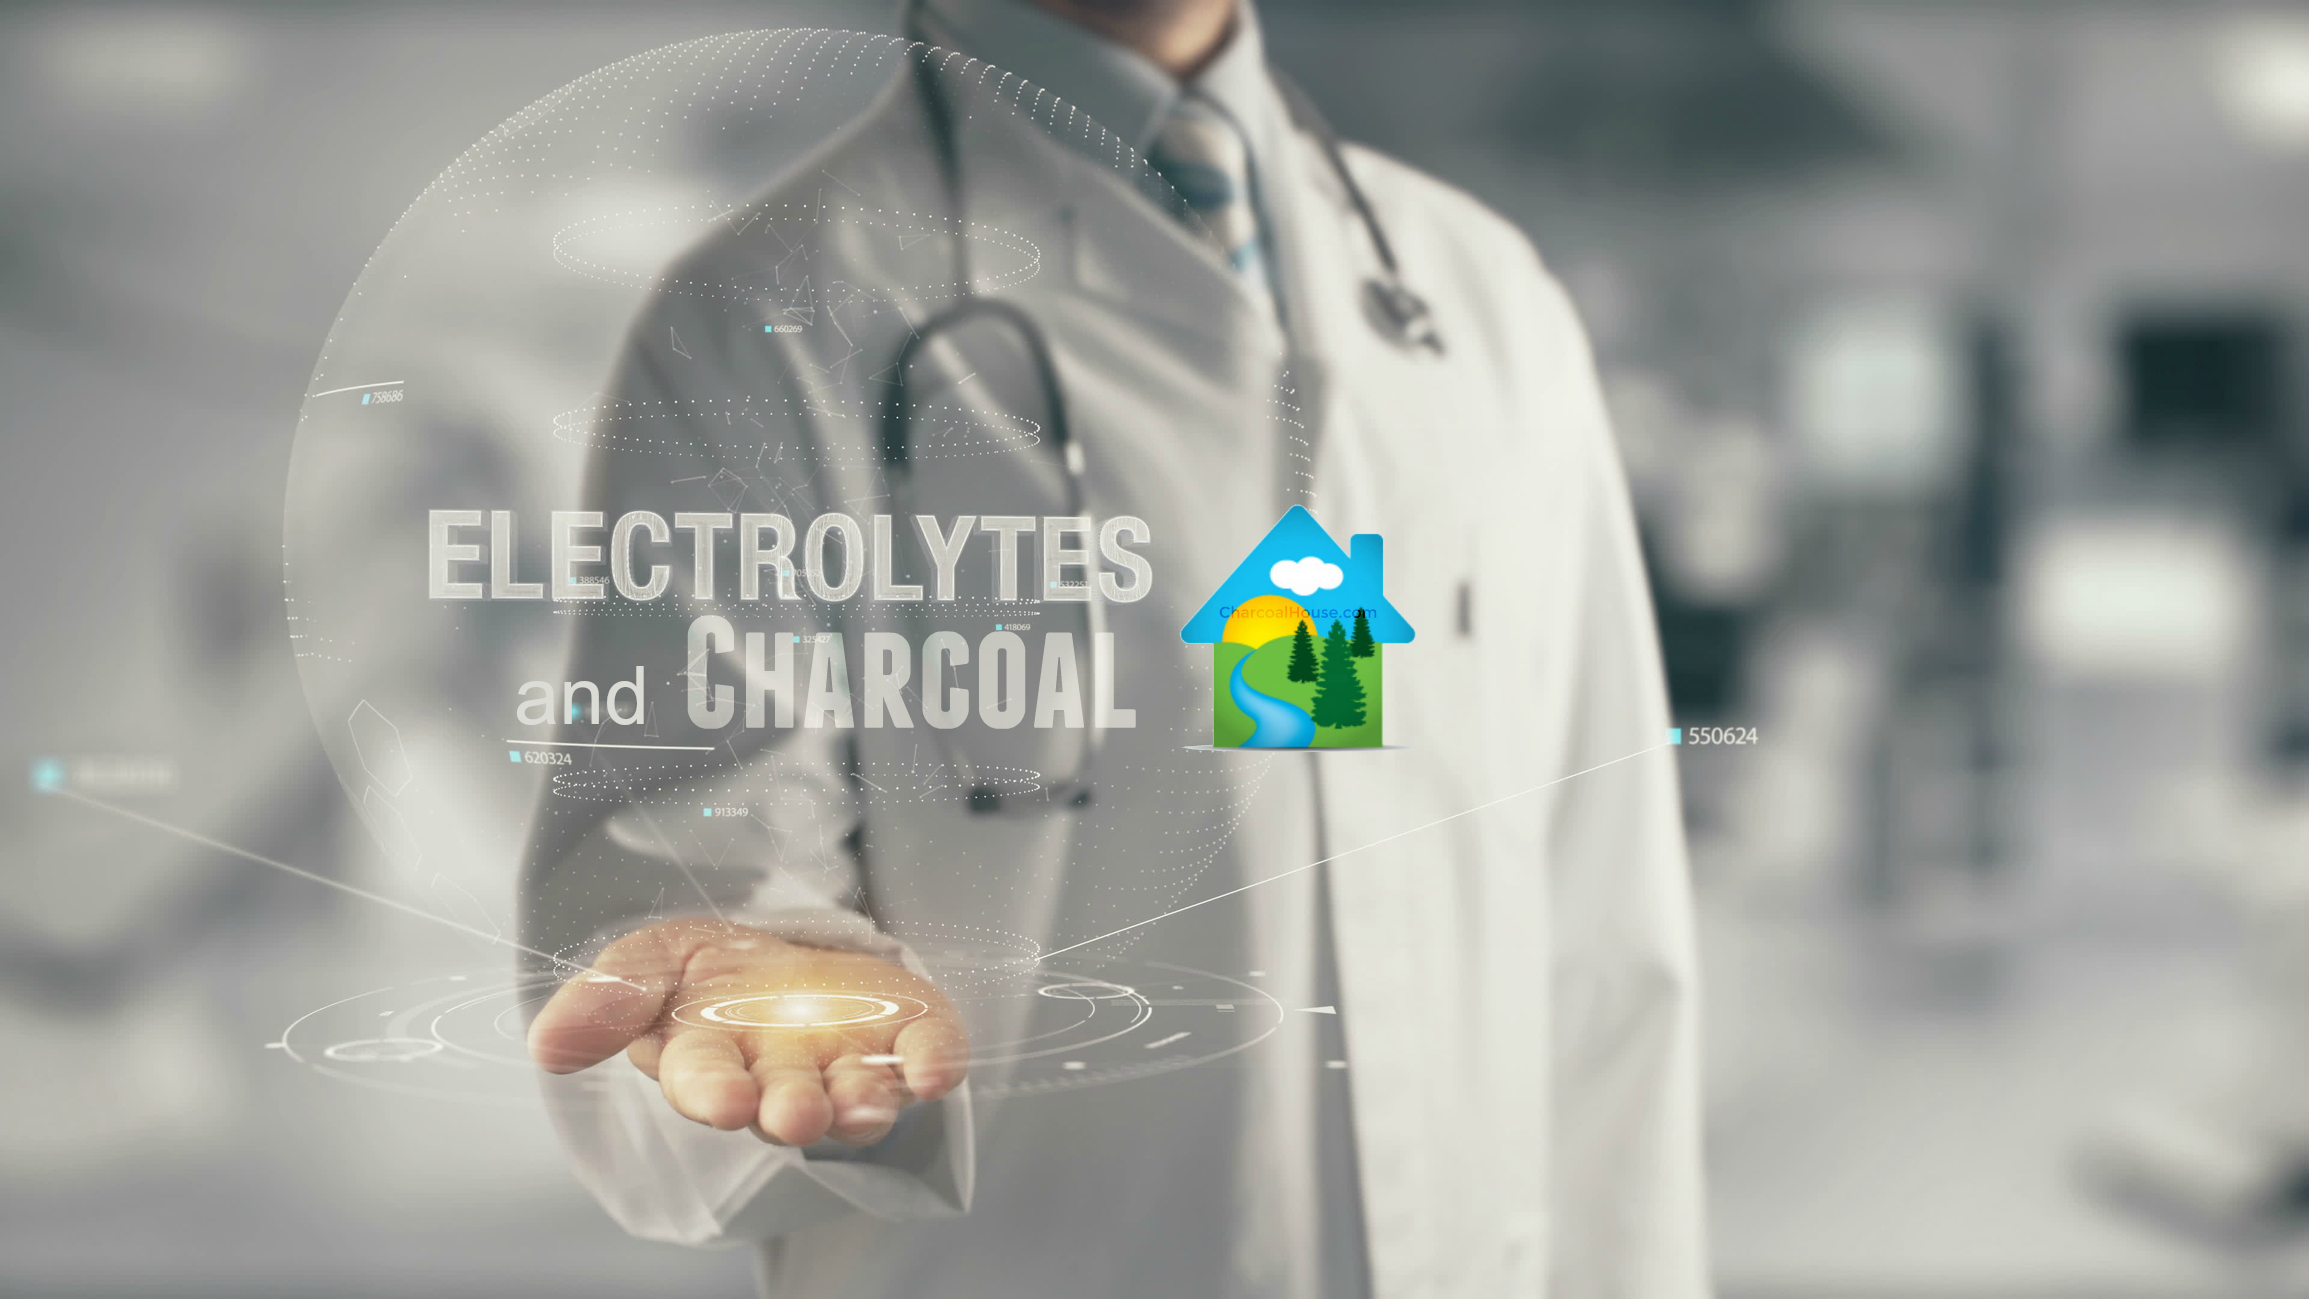 header Does Charcoal Adsorb Electrolytes - Does Charcoal Adsorb Electrolytes?